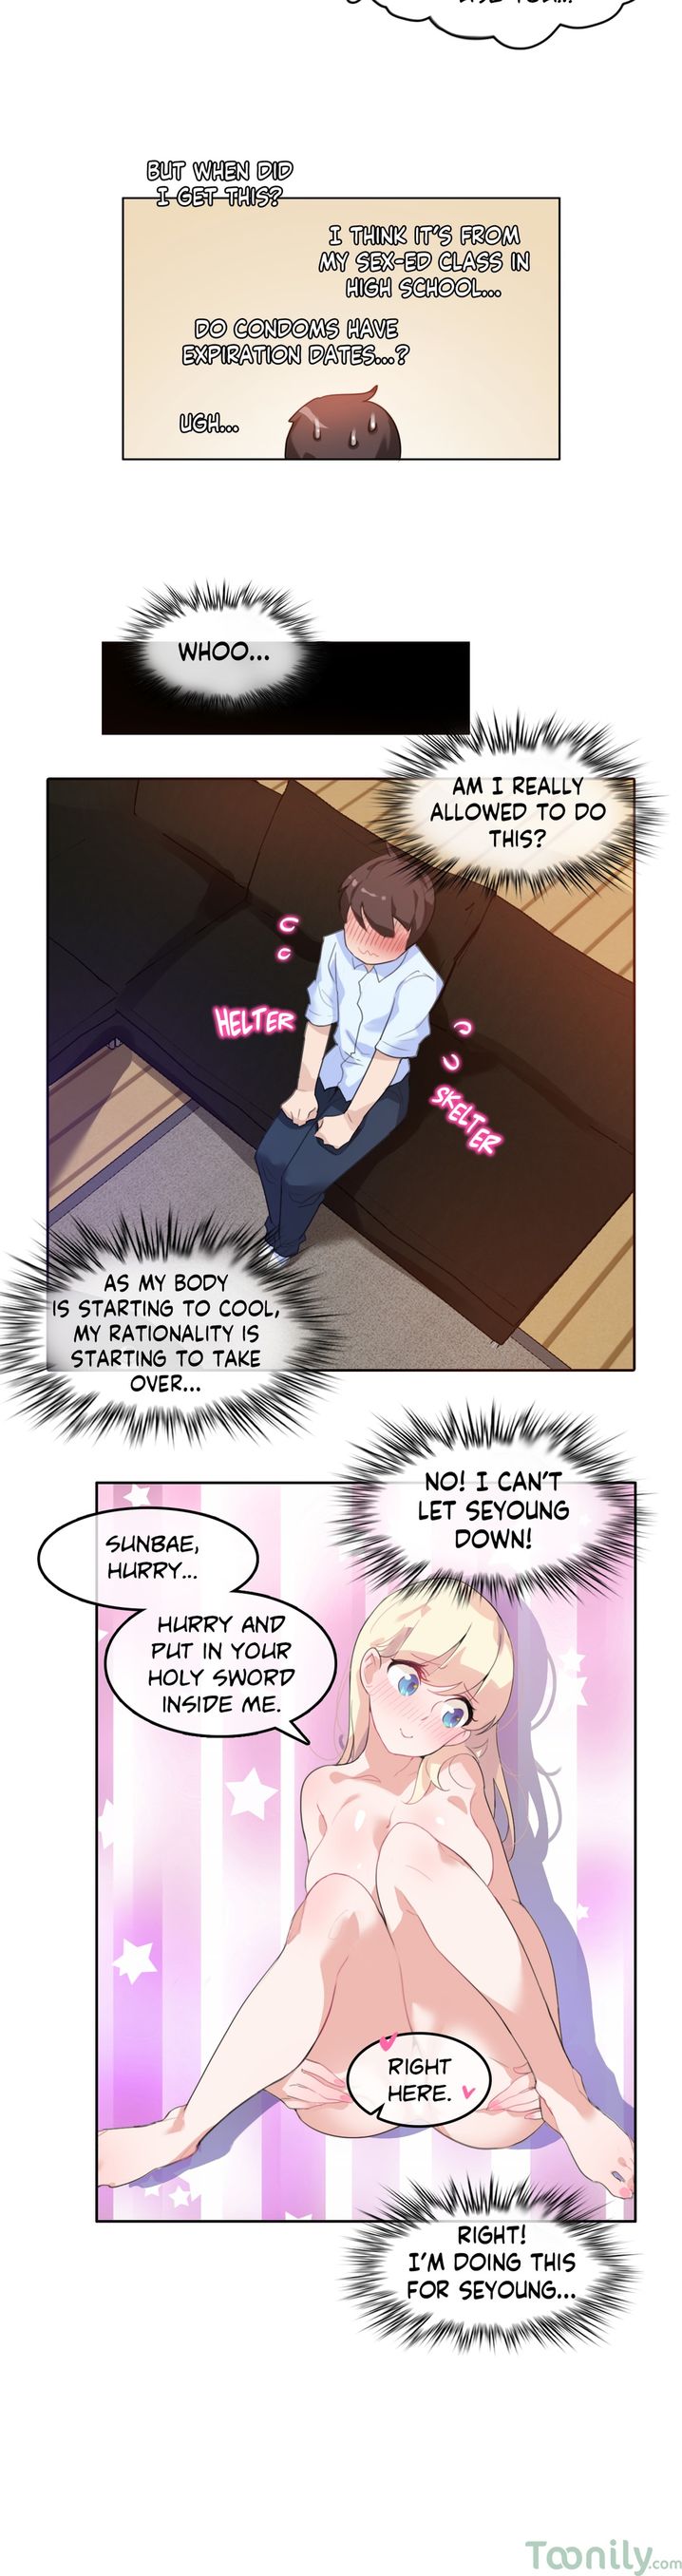 A Pervert’s Daily life - Chapter 11 Page 11